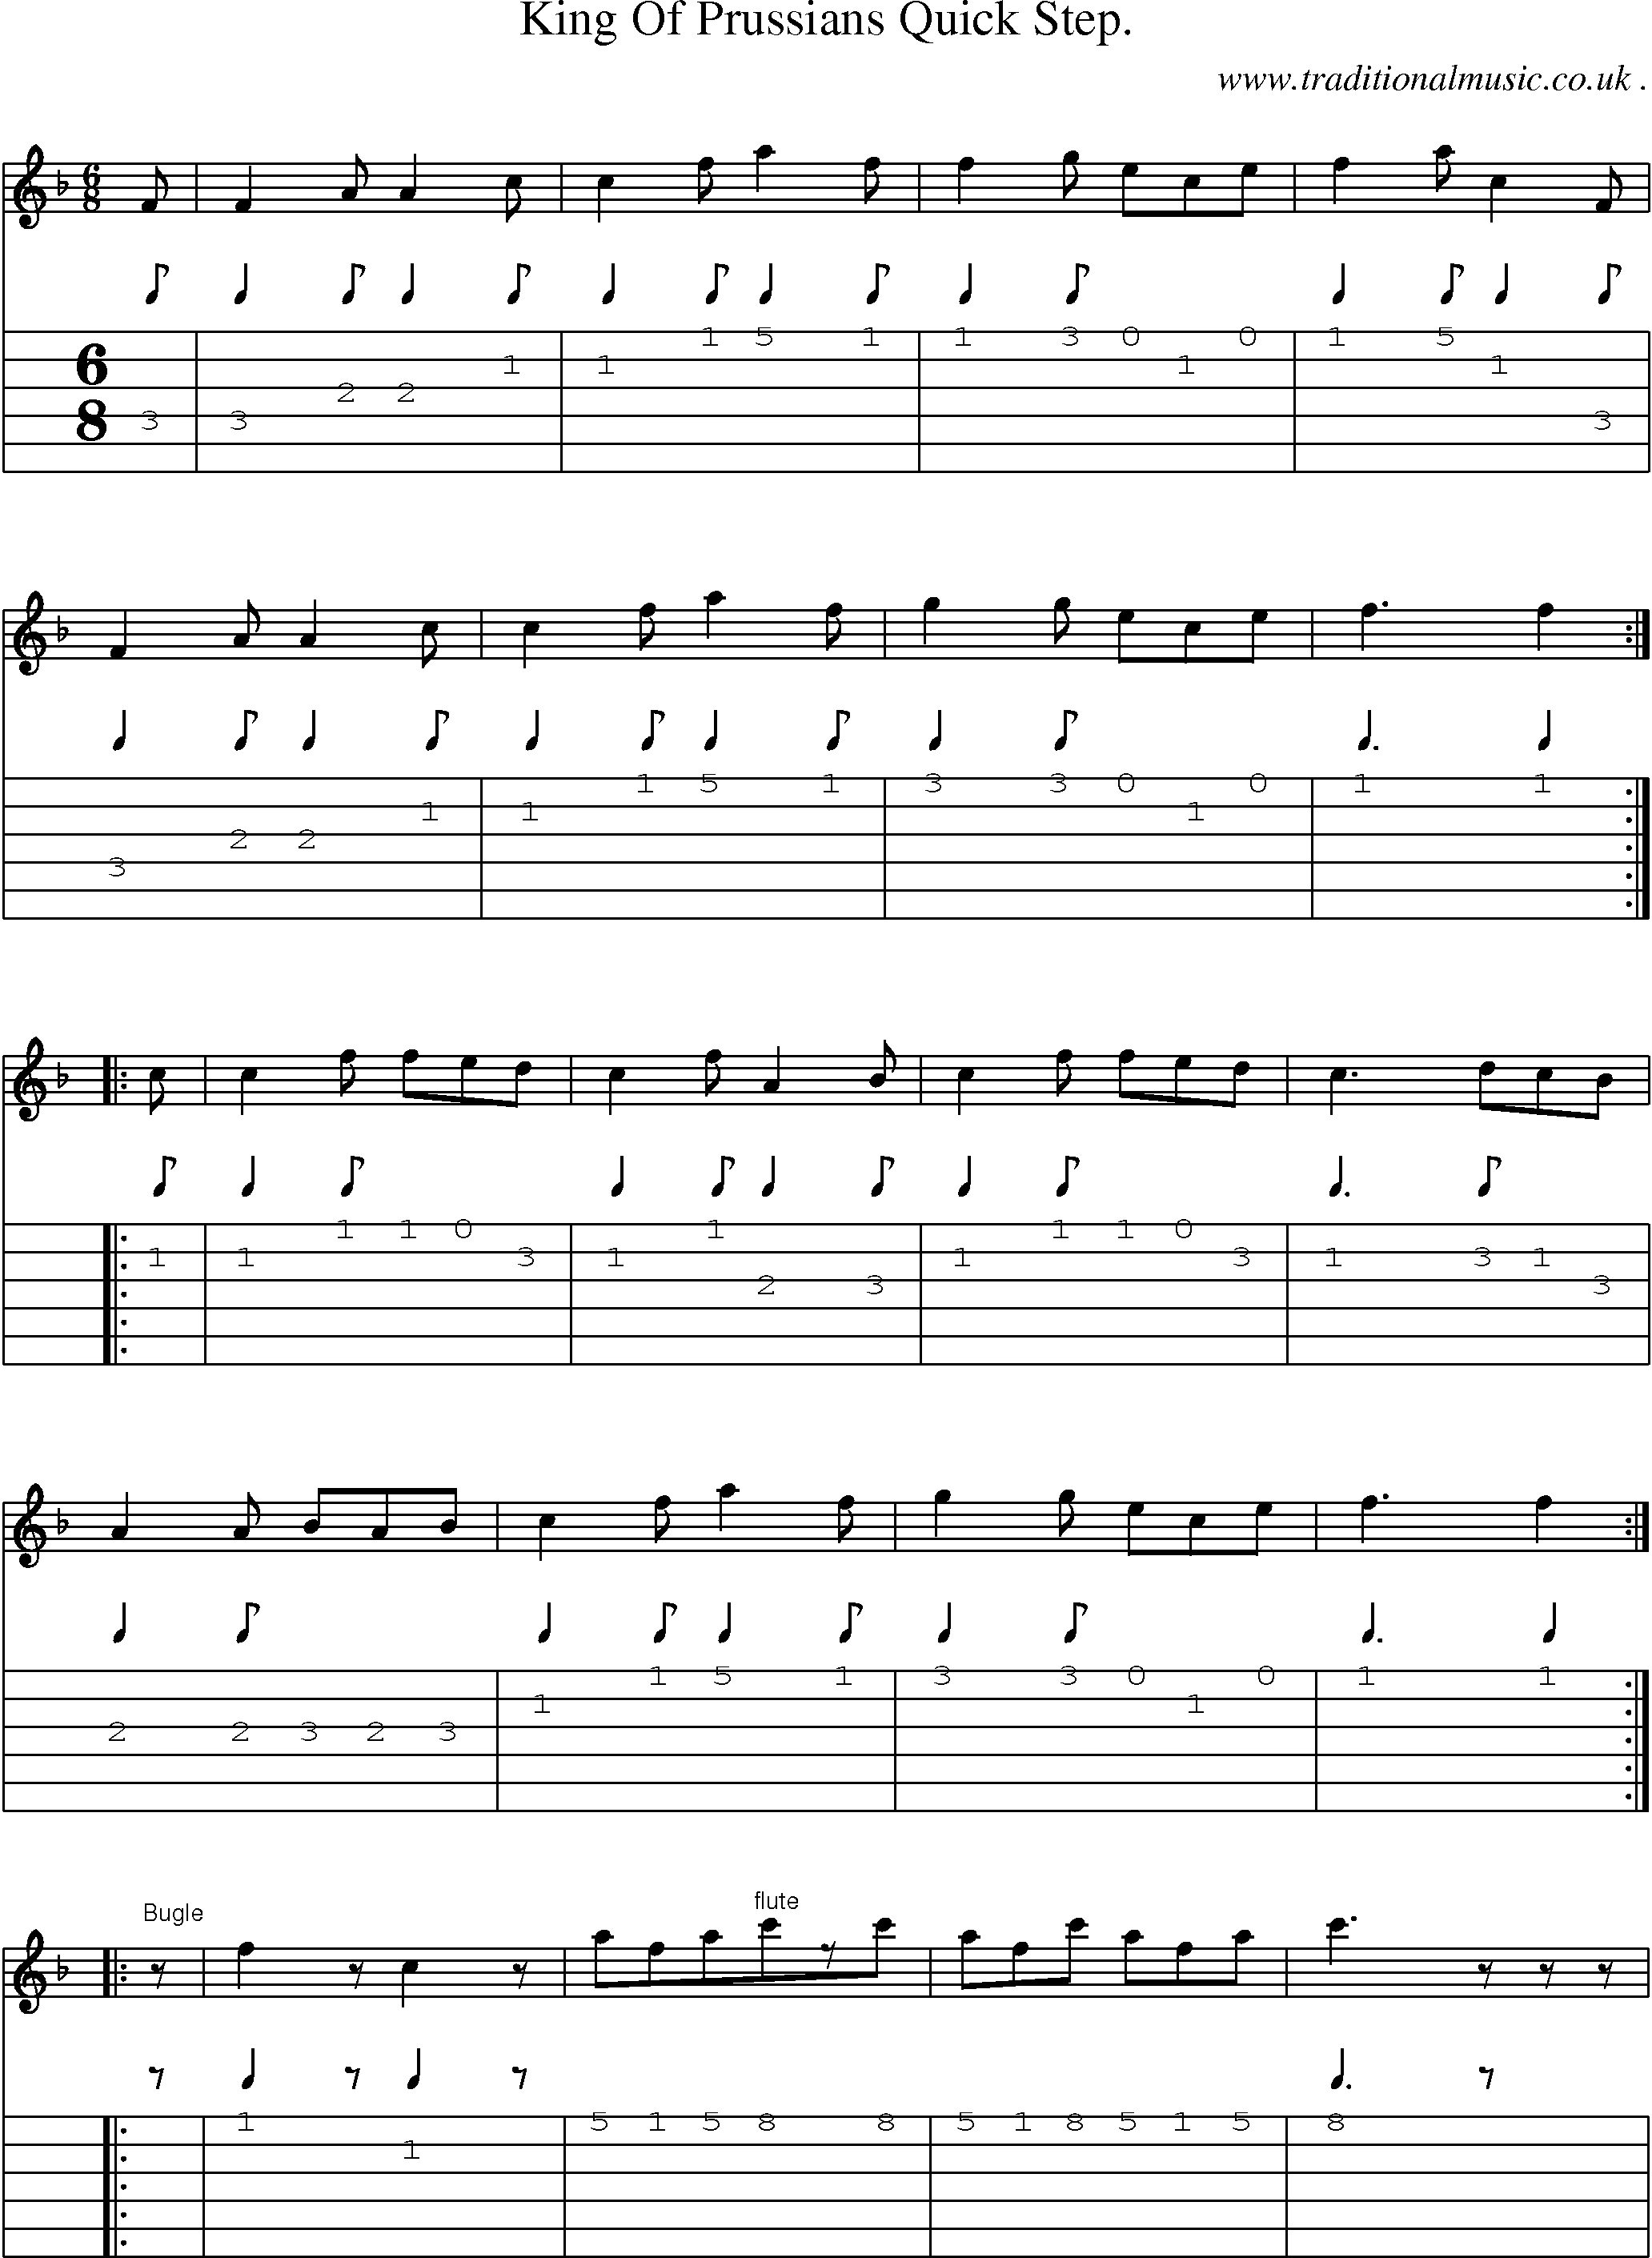 Sheet-Music and Guitar Tabs for King Of Prussians Quick Step